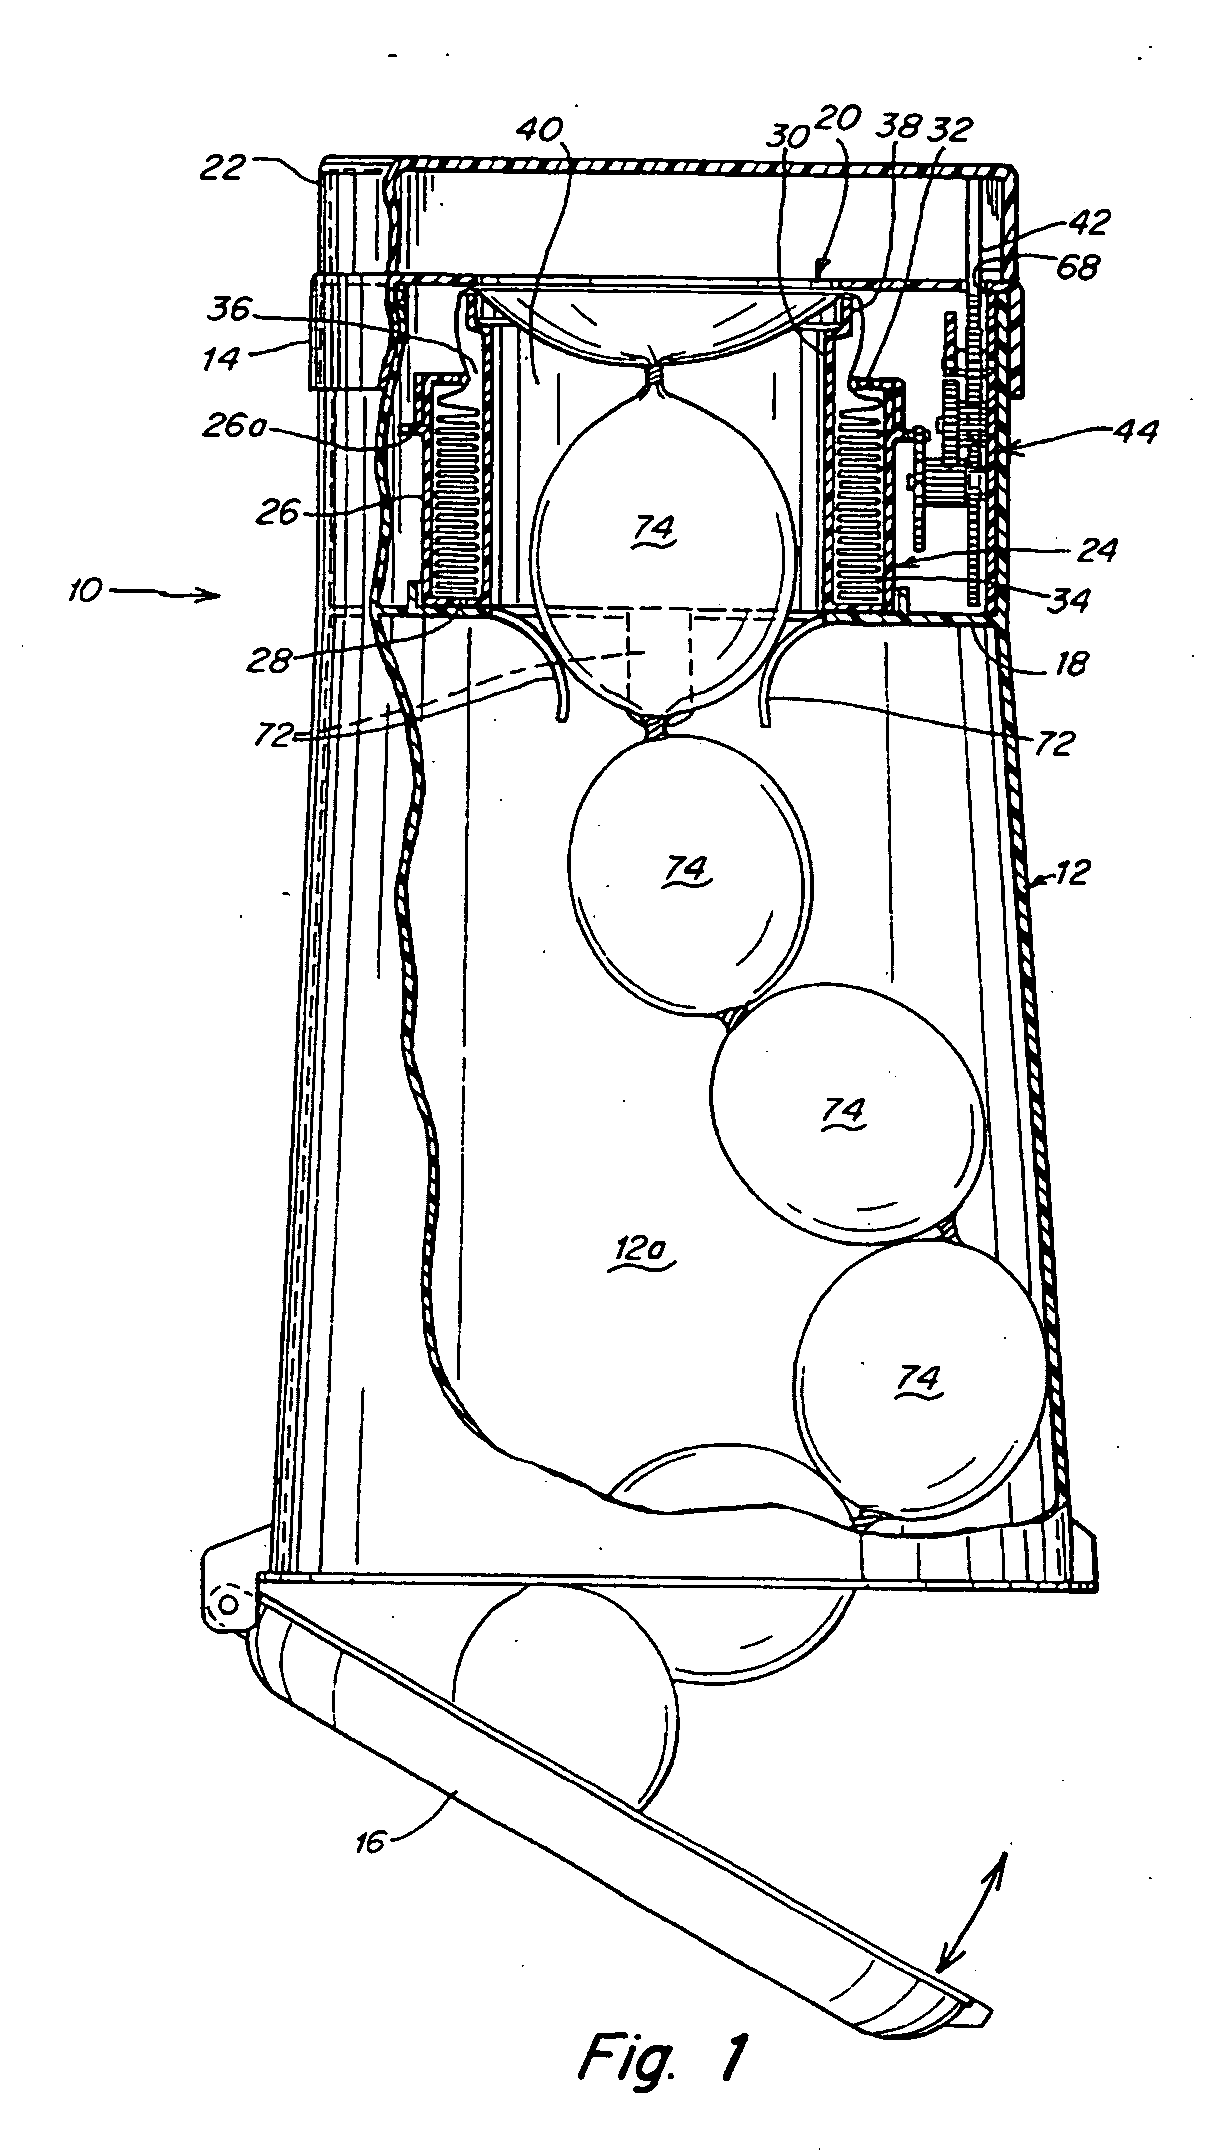 Waste disposal device including a mechanism for scoring a flexible tubing dispensed from a cartridge